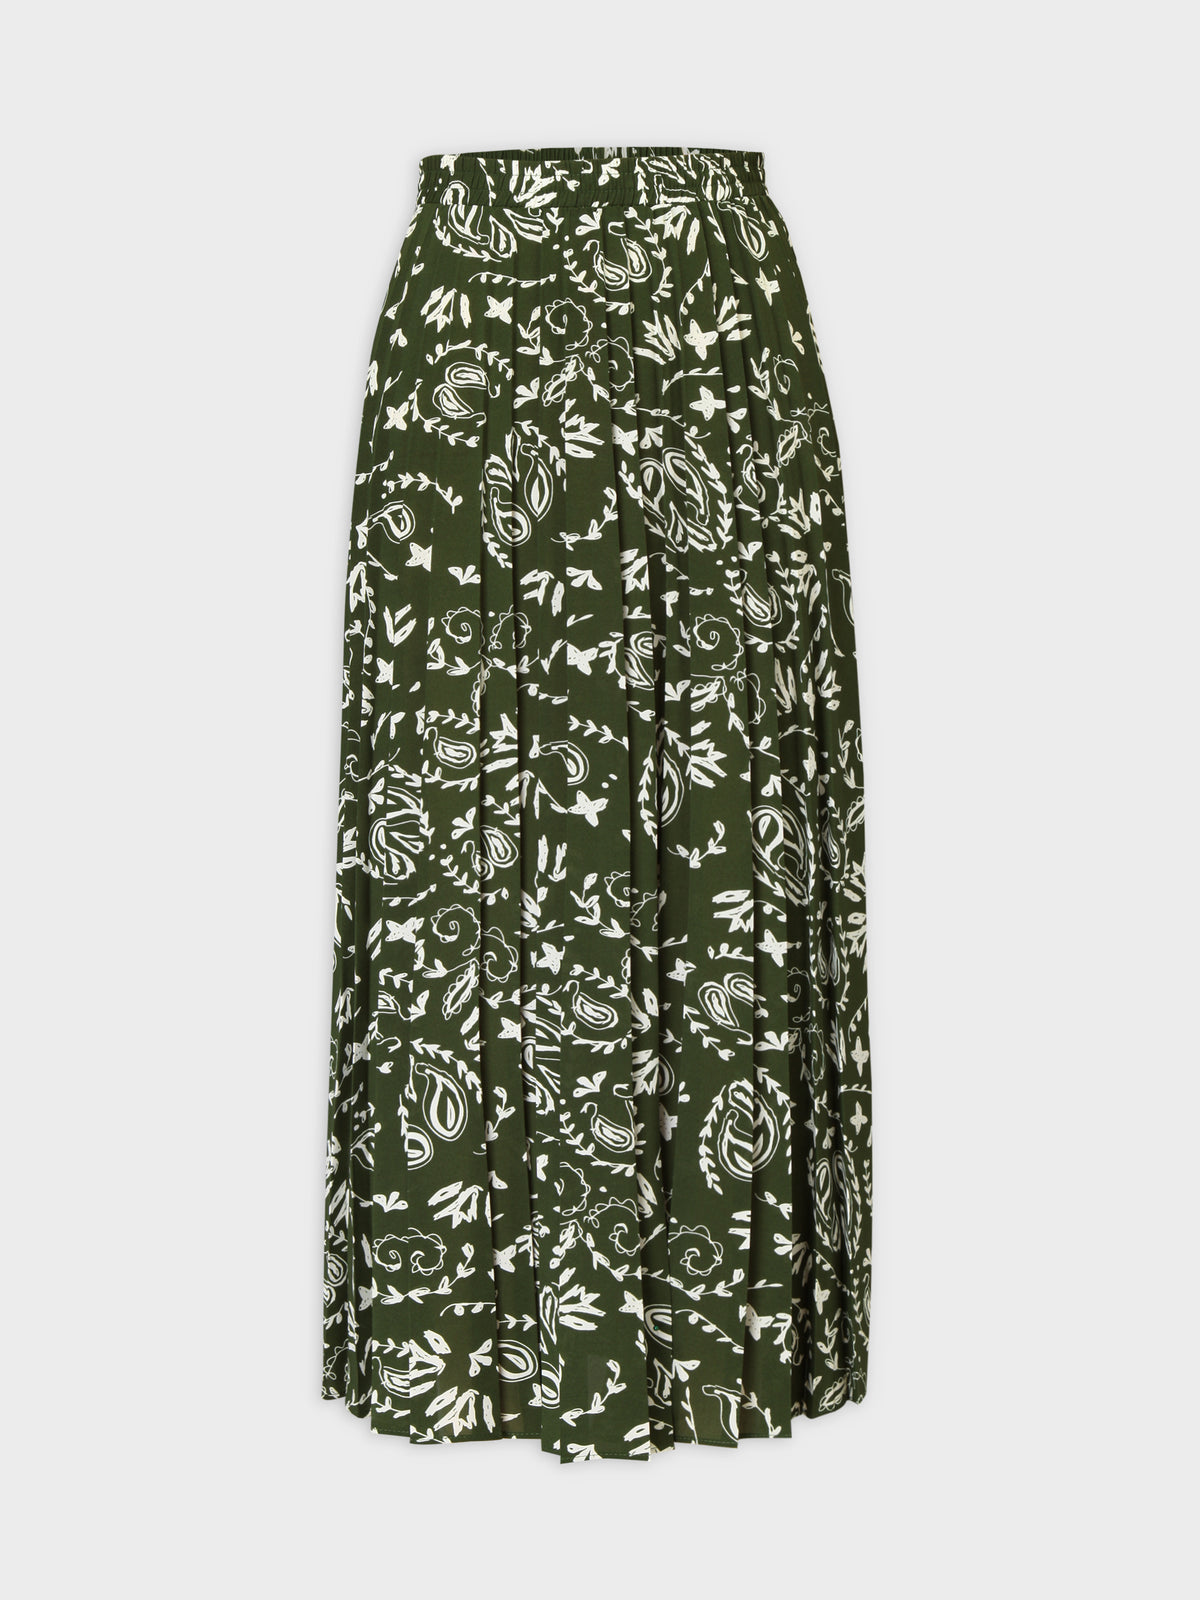 Covered Band Pleated Skirt 37"-Green Paisley